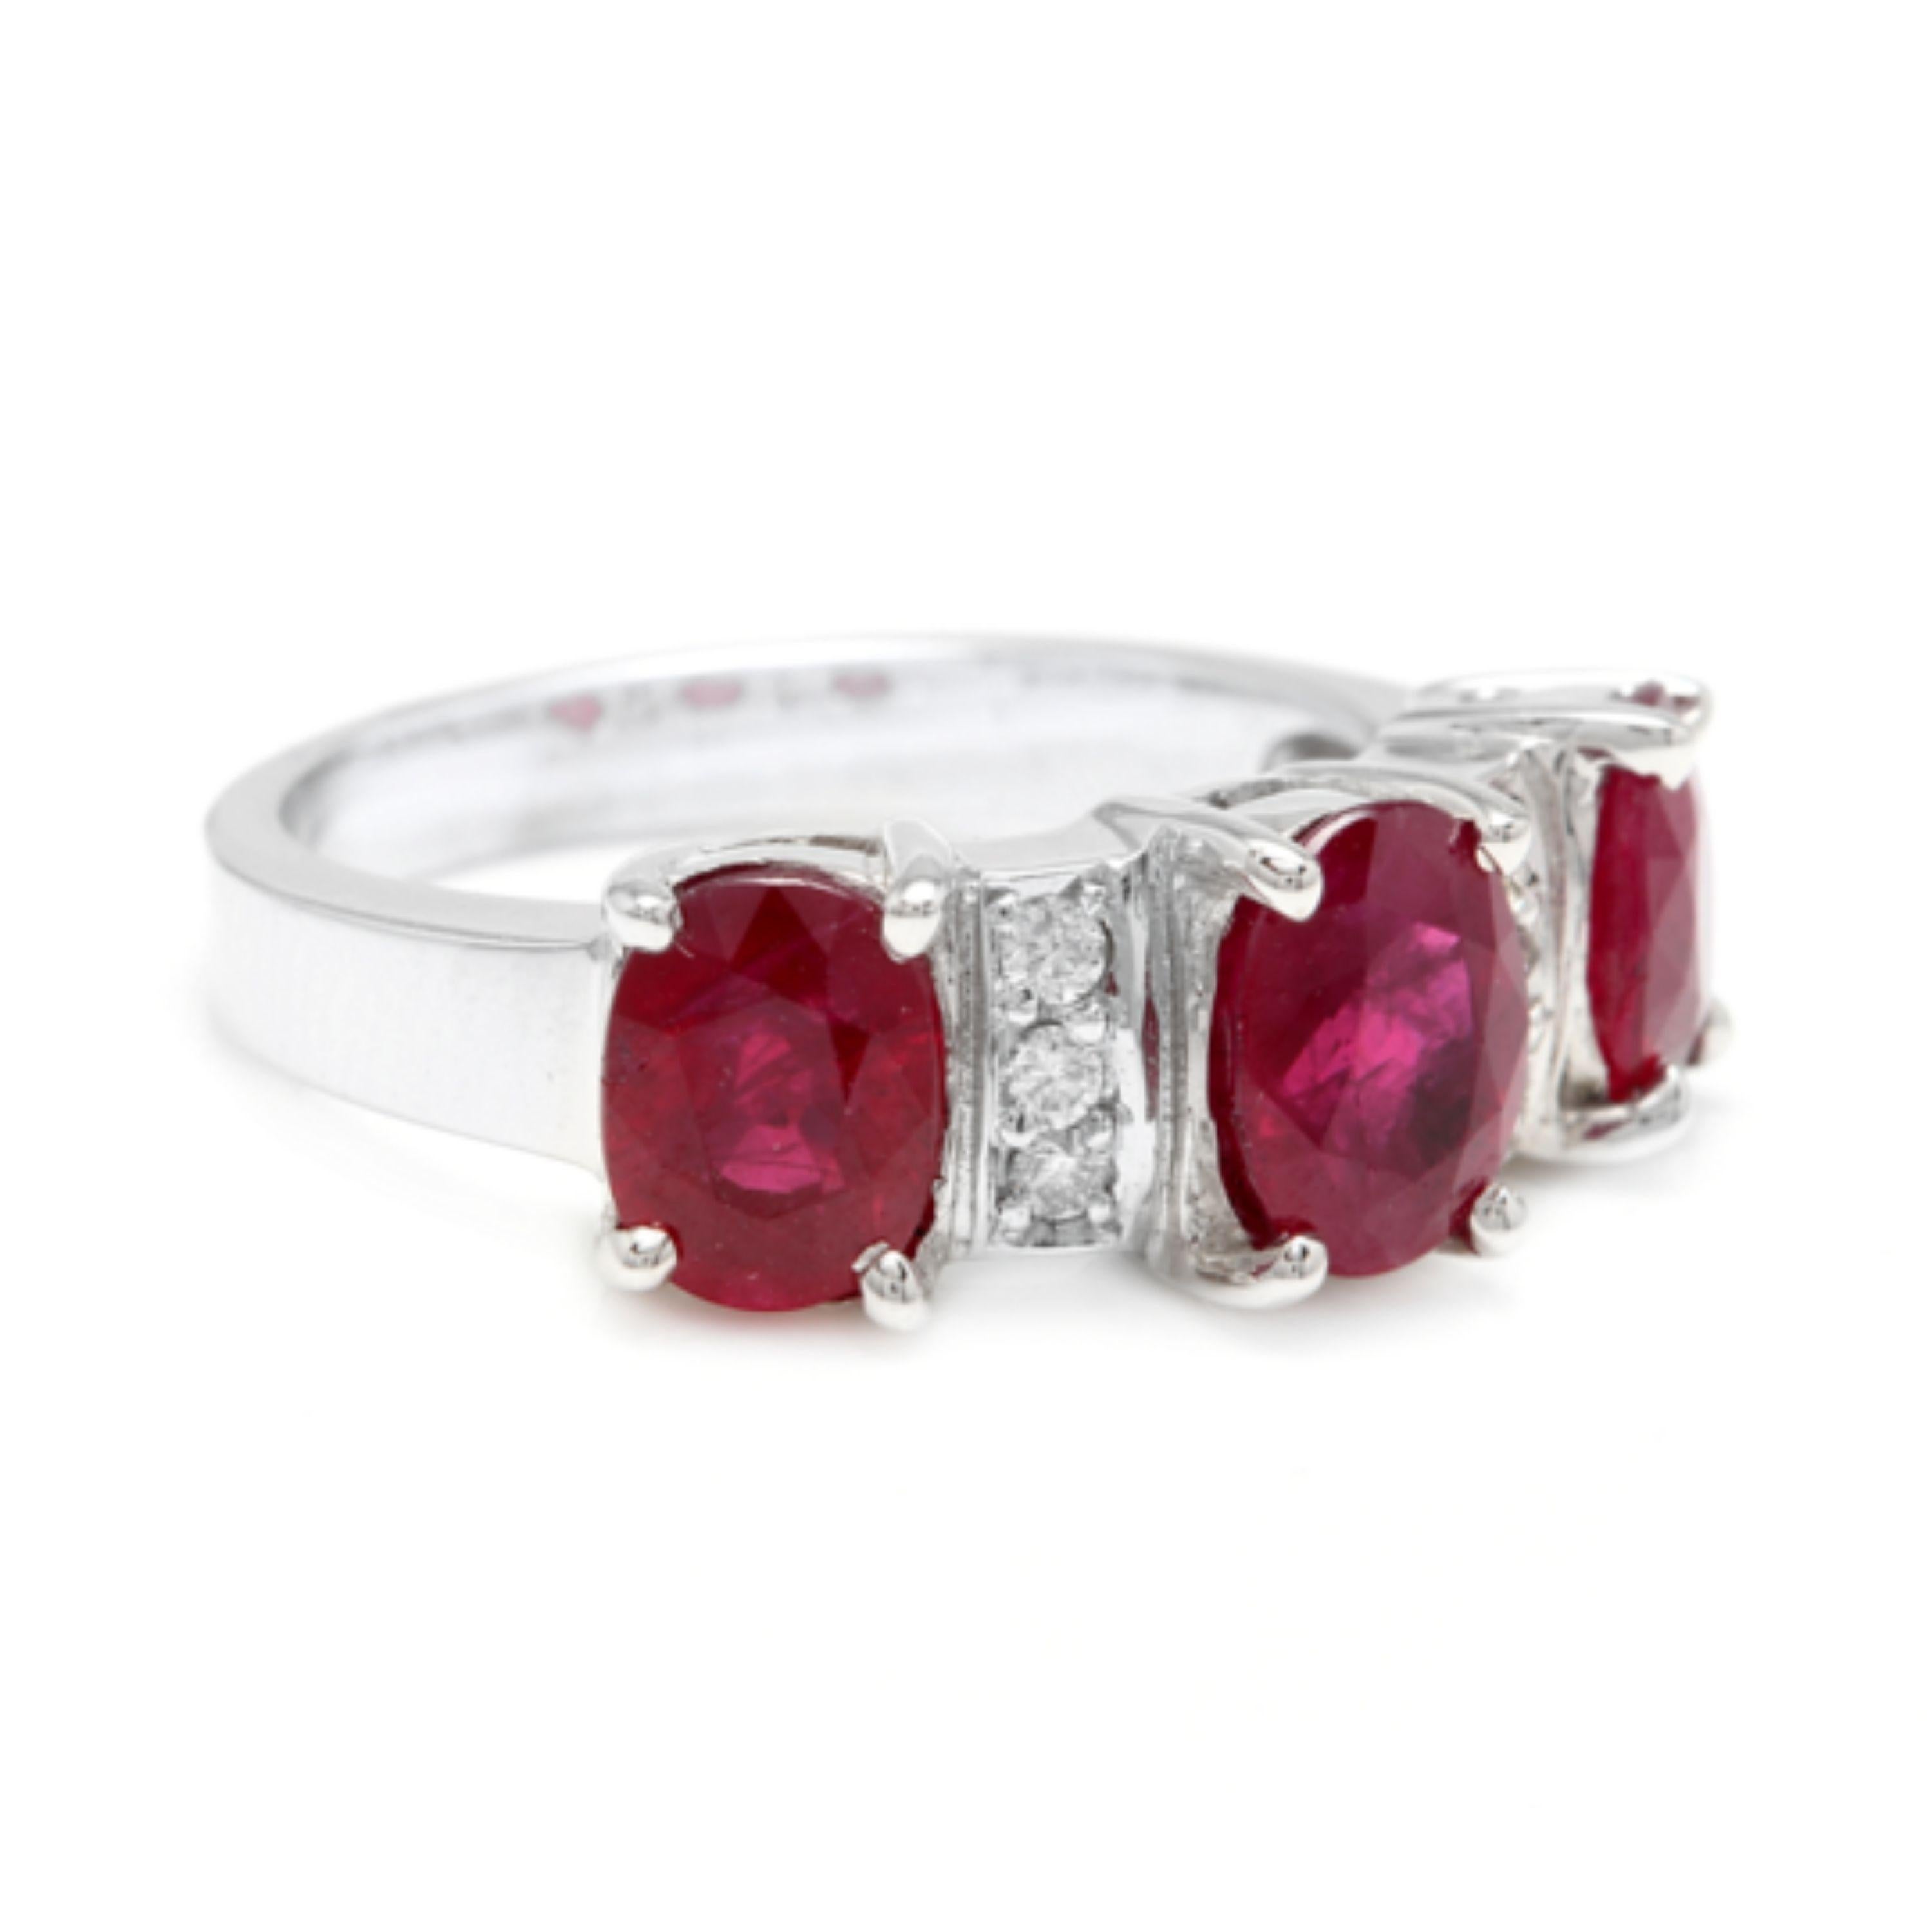 4.15 Carats Impressive Natural Red Ruby and Diamond 14K White Gold Ring

Total Natural Red Ruby Weight is: Approx. 4.00 Carats

Ruby Measures: Approx. 7.00 x 5.00mm

Ruby Treatment: Heat

Natural Round Diamonds Weight: Approx. 0.15 Carats (color G-H